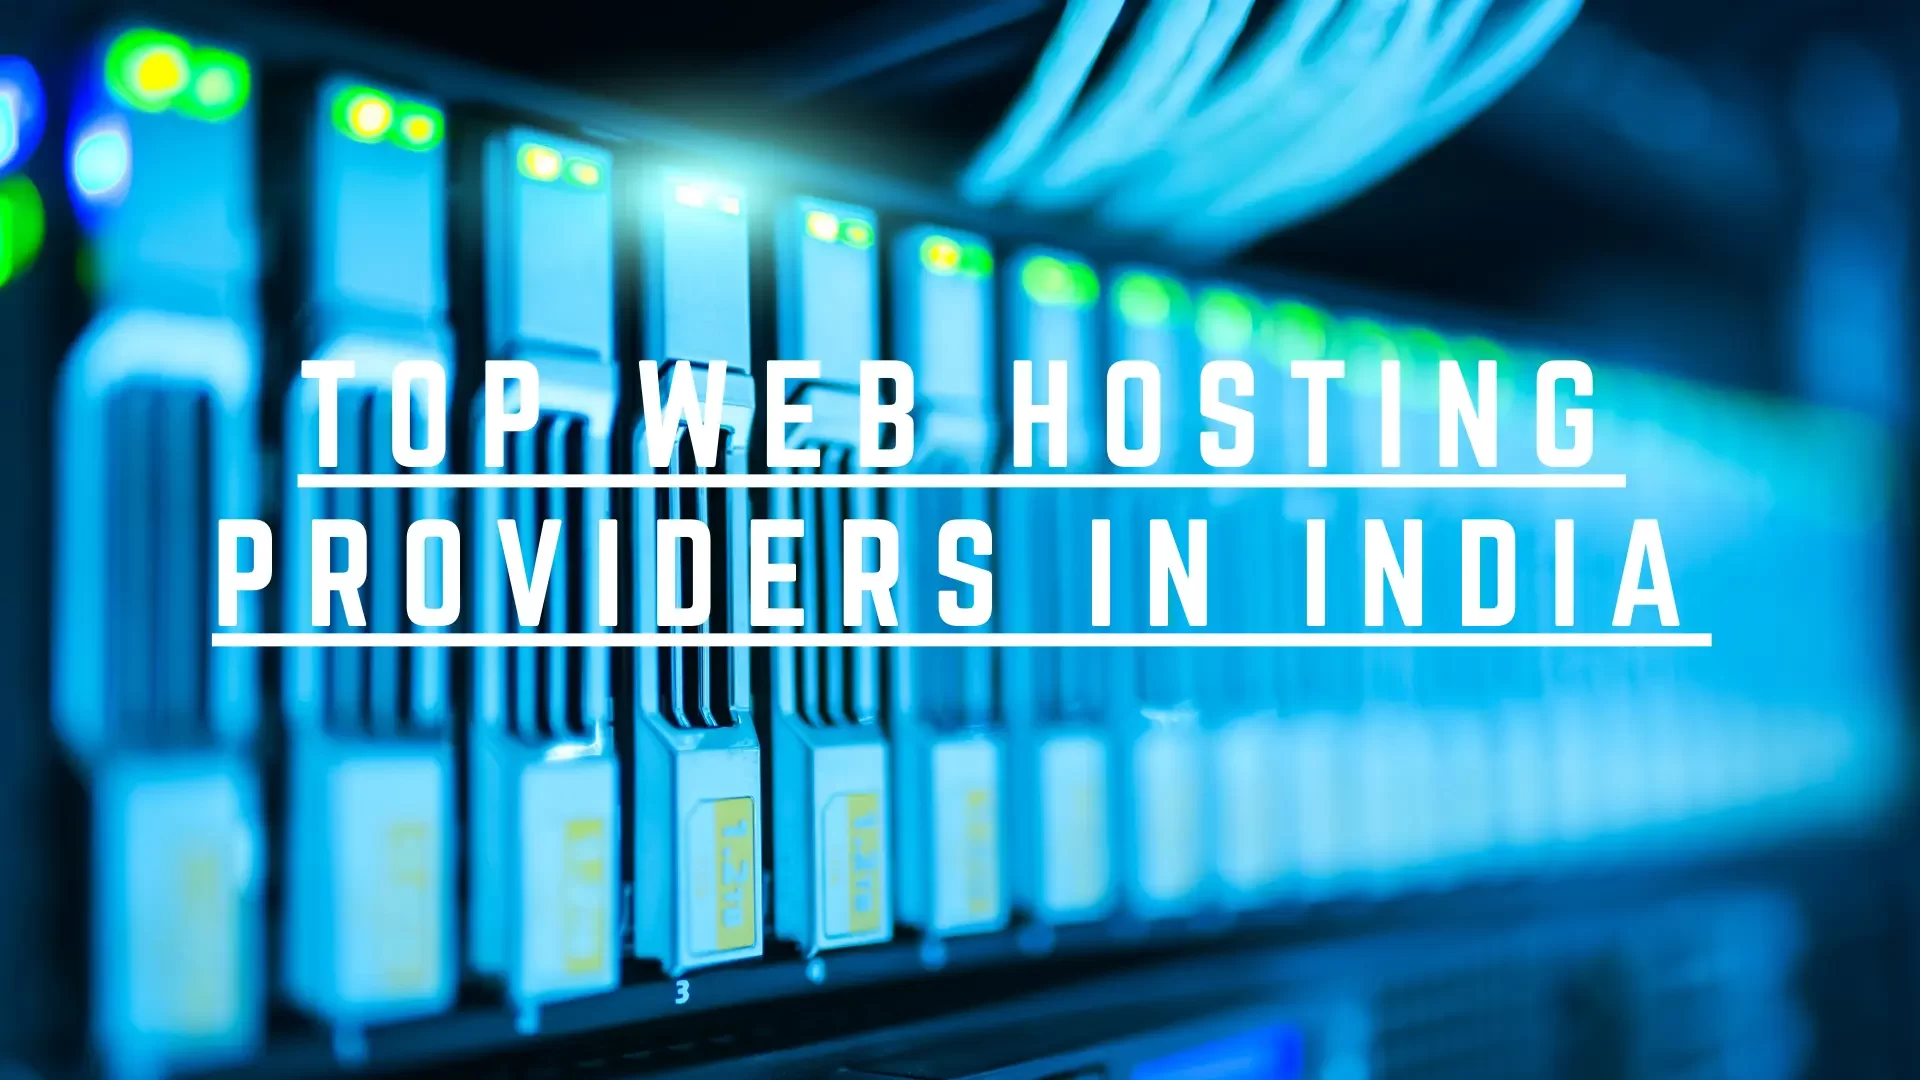 Top Web Hosting Providers India